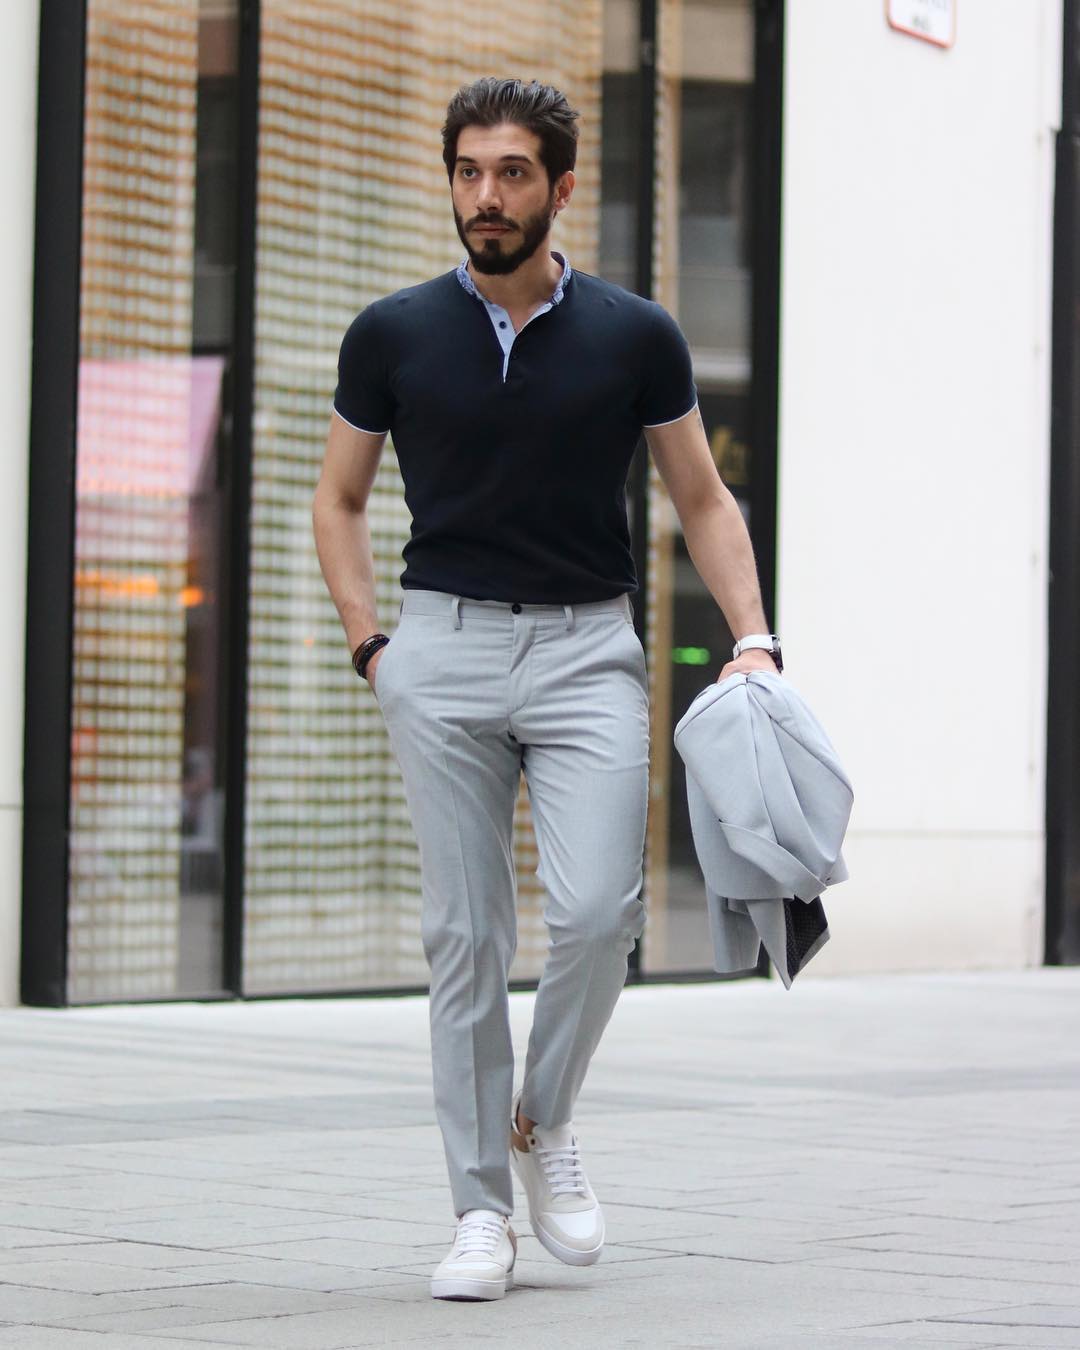 5 Pants & T-shirt Outfits For Men #casualstyle #mensfashion # ...